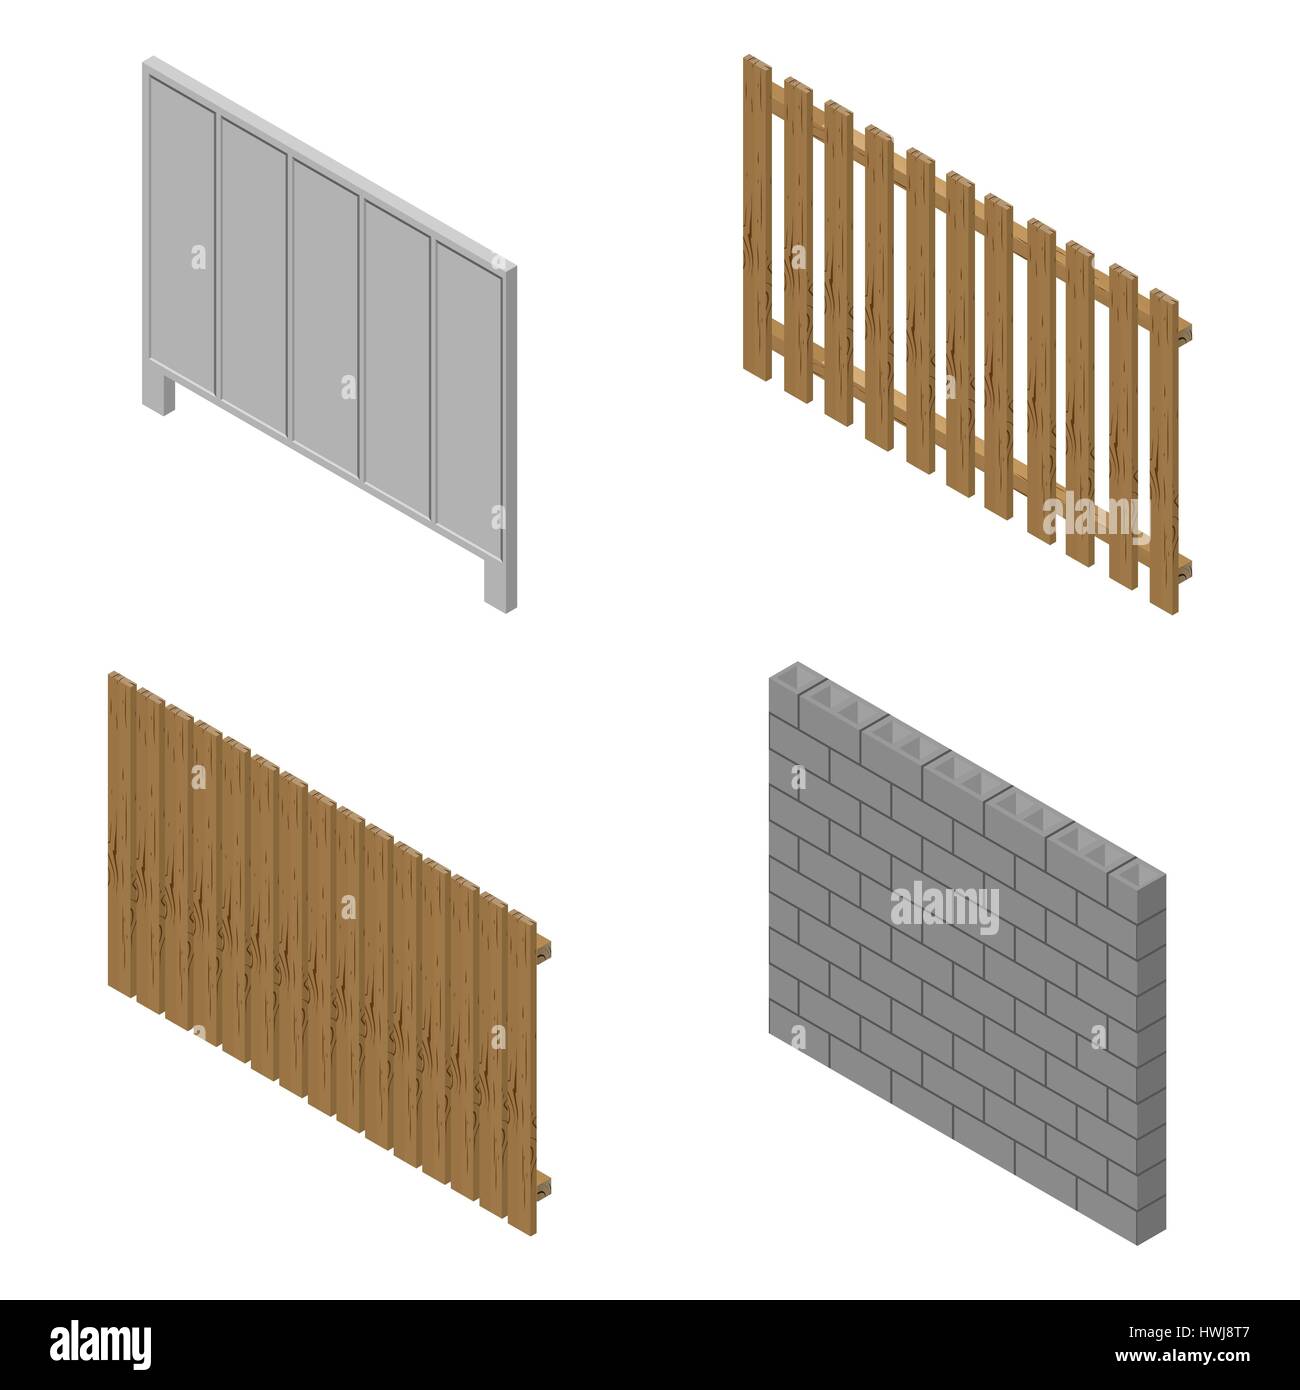 A set of isometric spans fences of various materials. Wood, concrete and cinder blocks. Isolated on white background. Elements of buildings and landsc Stock Vector